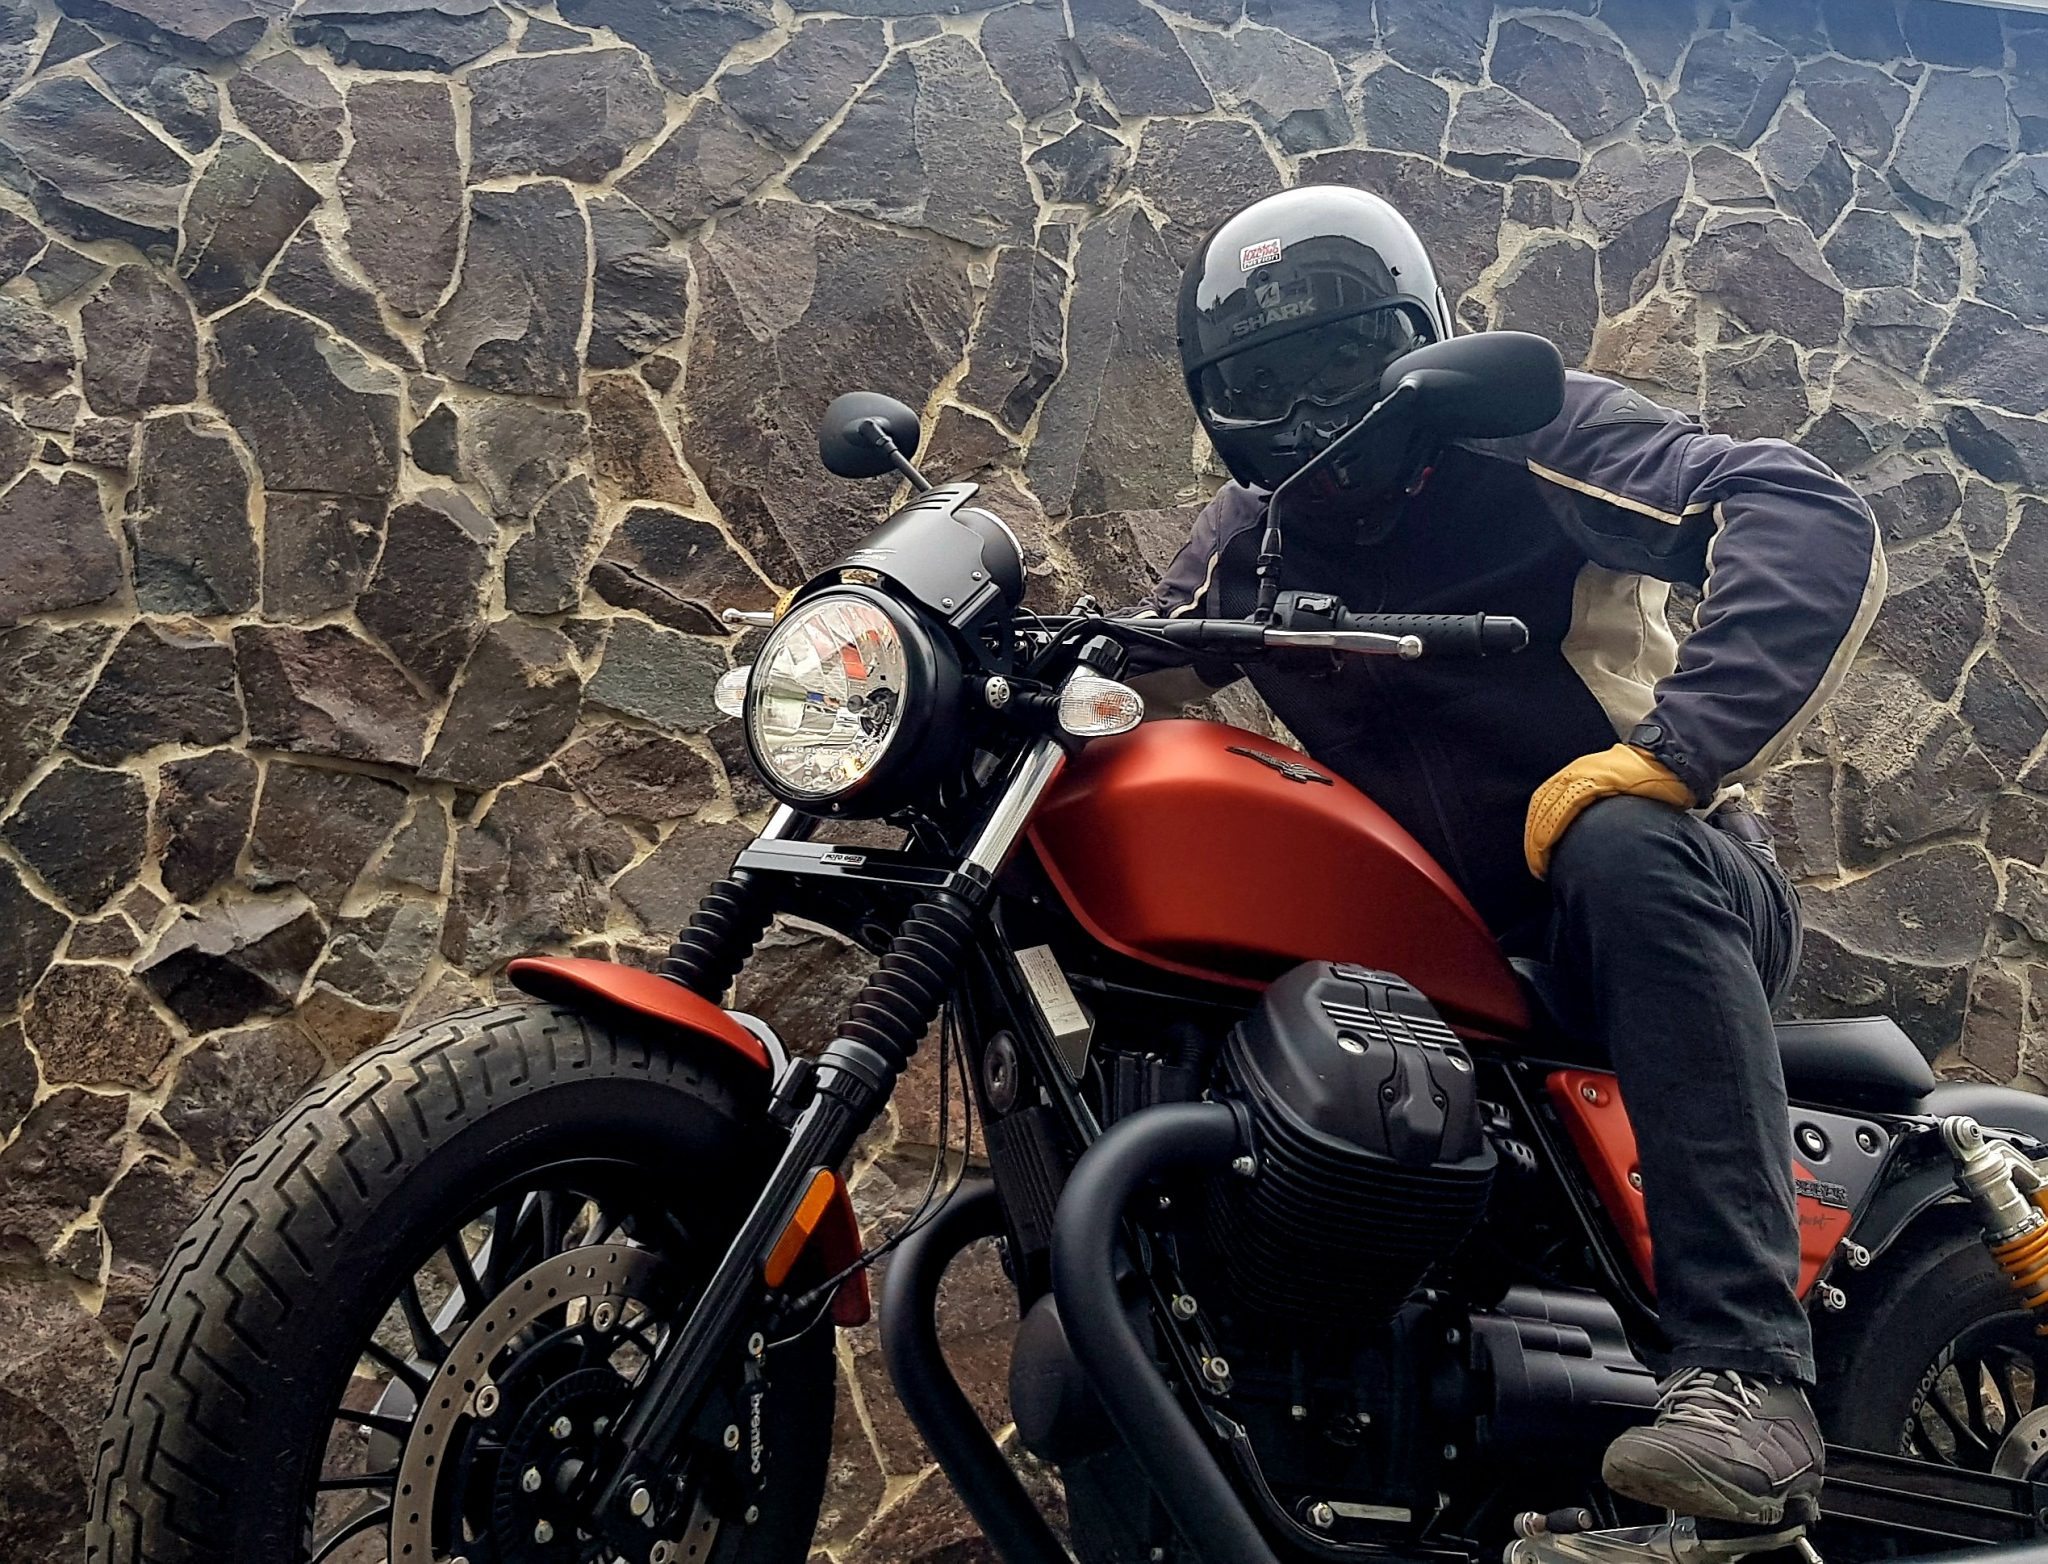 2020 Moto Guzzi V9 Bobber Sport First Ride Review: When Beauty is Not